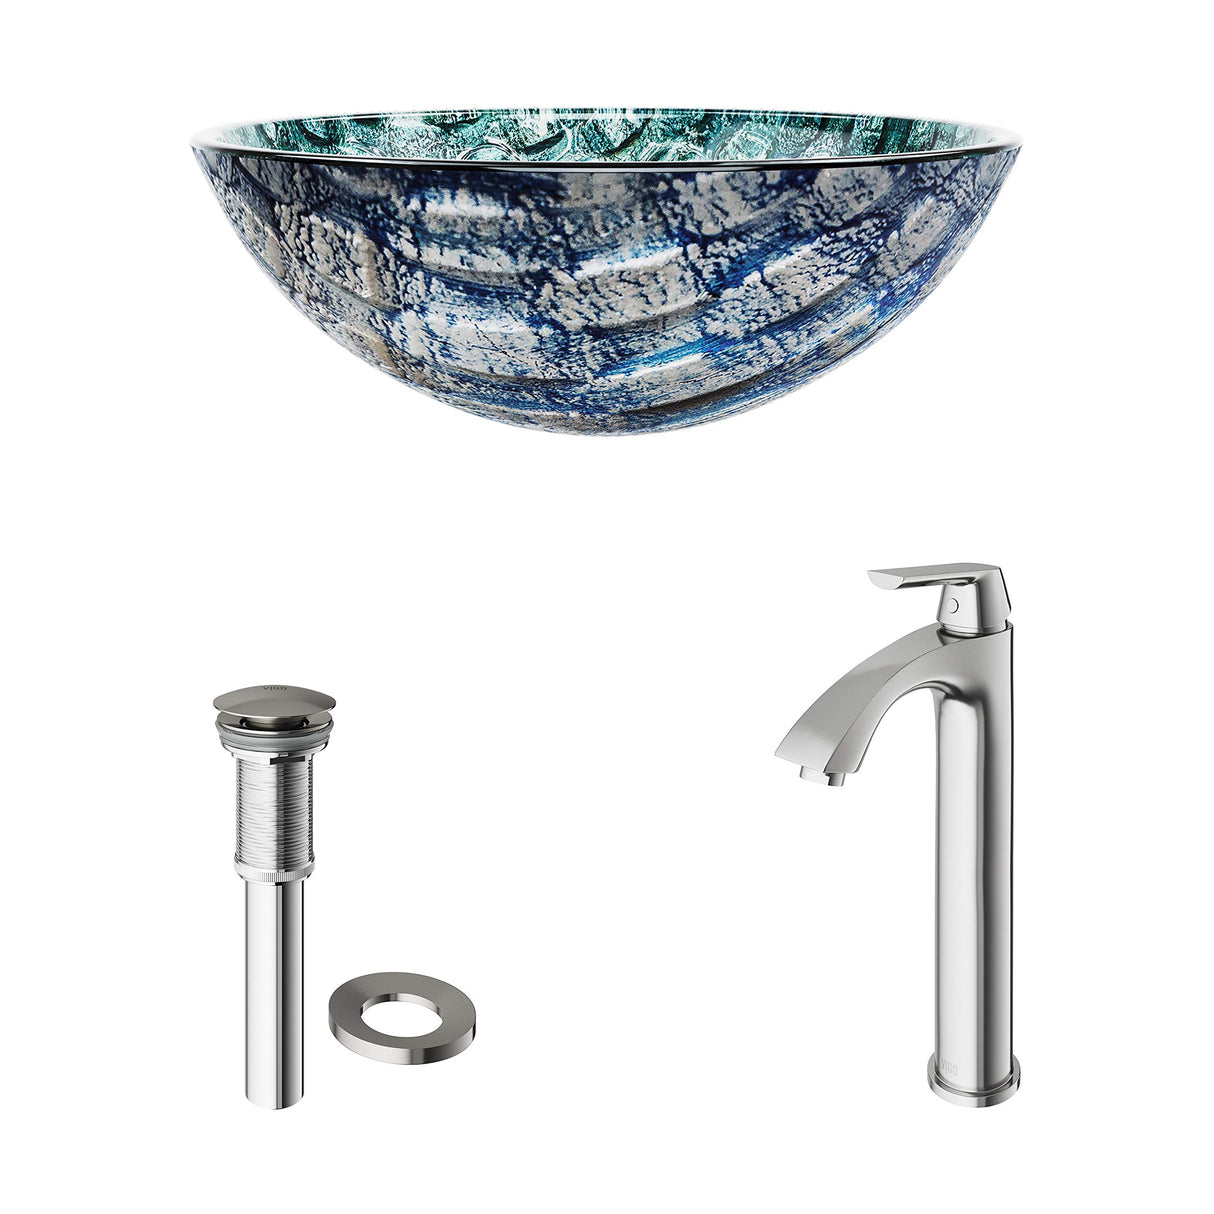 VIGO VGT549 16.5" L -16.5" W -12.38" H Oceania Handmade Glass Round Vessel Bathroom Sink Set in Patterned Teal Finish with Brushed Nickel Single-Handle Single Hole Faucet and Pop Up Drain